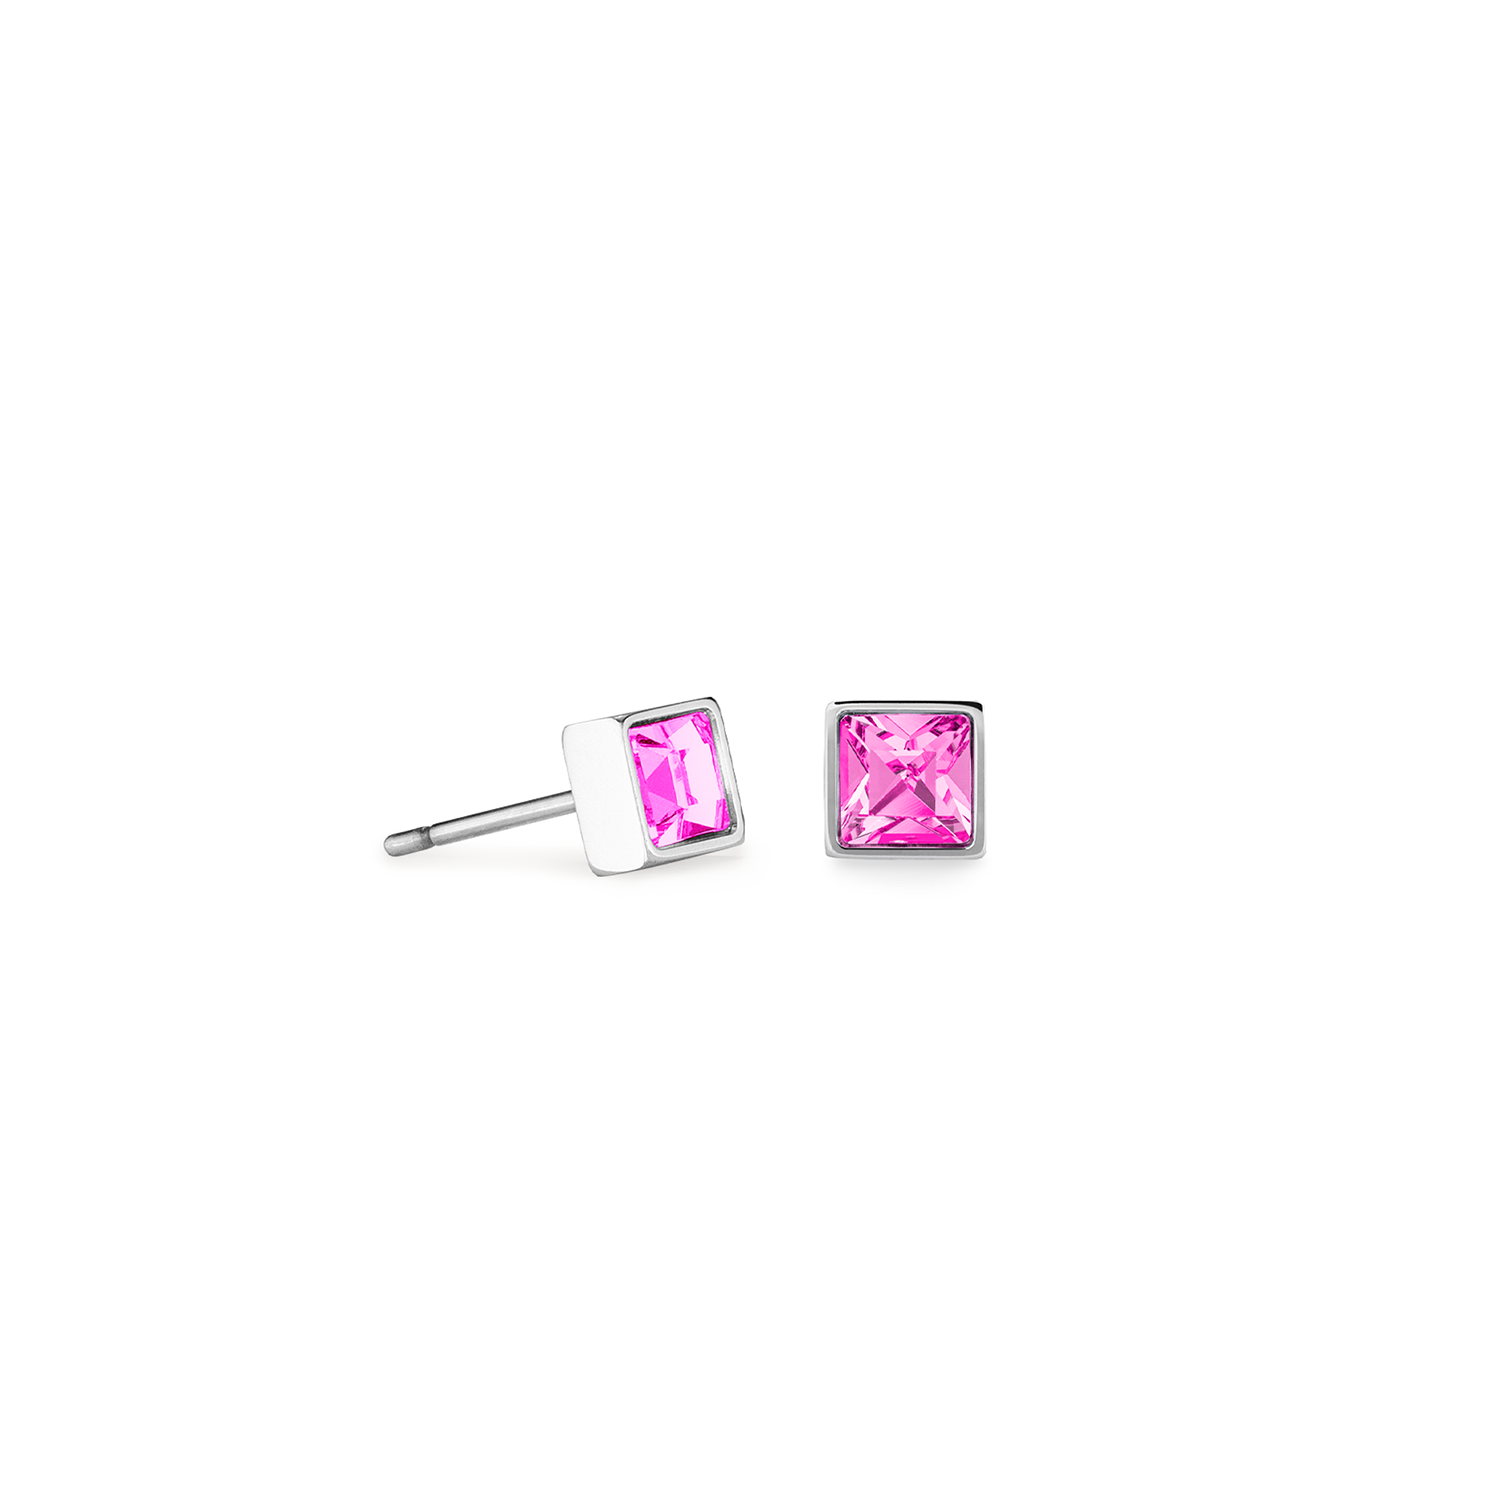 Brilliant Square Small Stud Earrings with Crystals 0501/21_1917 - Pink